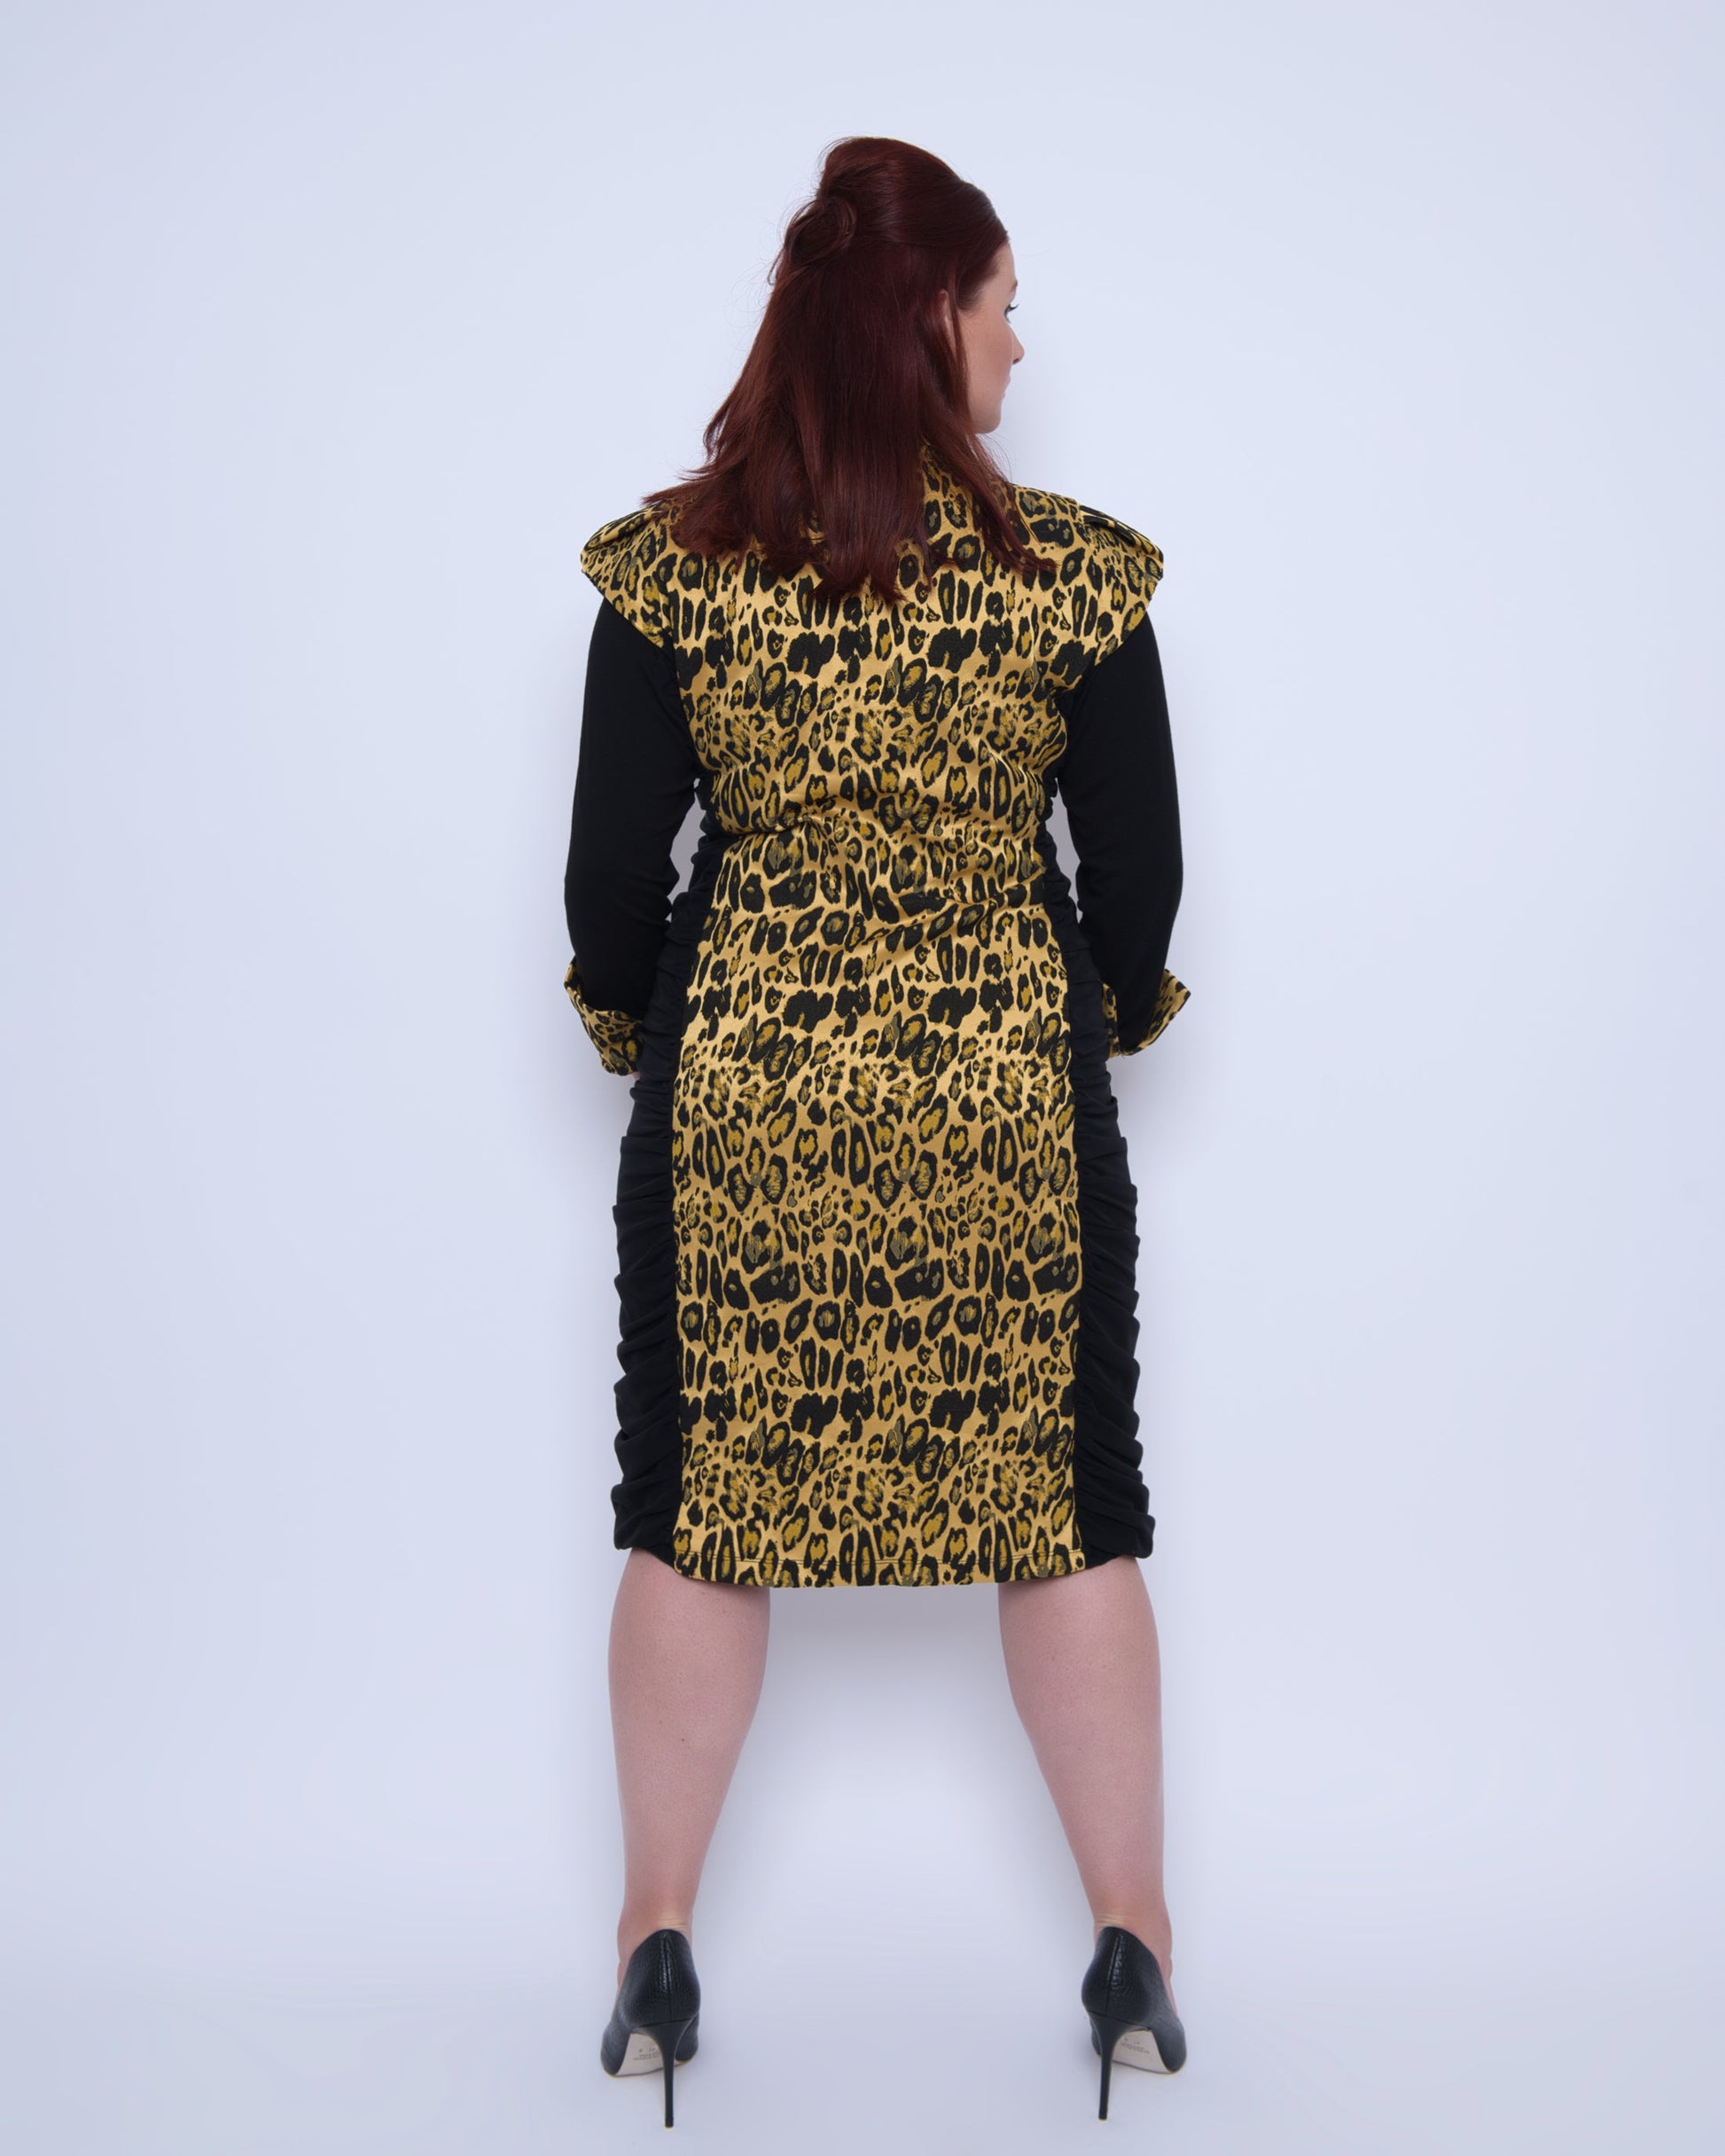 Women's Plus Size Black Gold Bodycon Midi Leopard Brocade Jacquard Dress shown from the back, styled with black heels for an elegant, polished look.